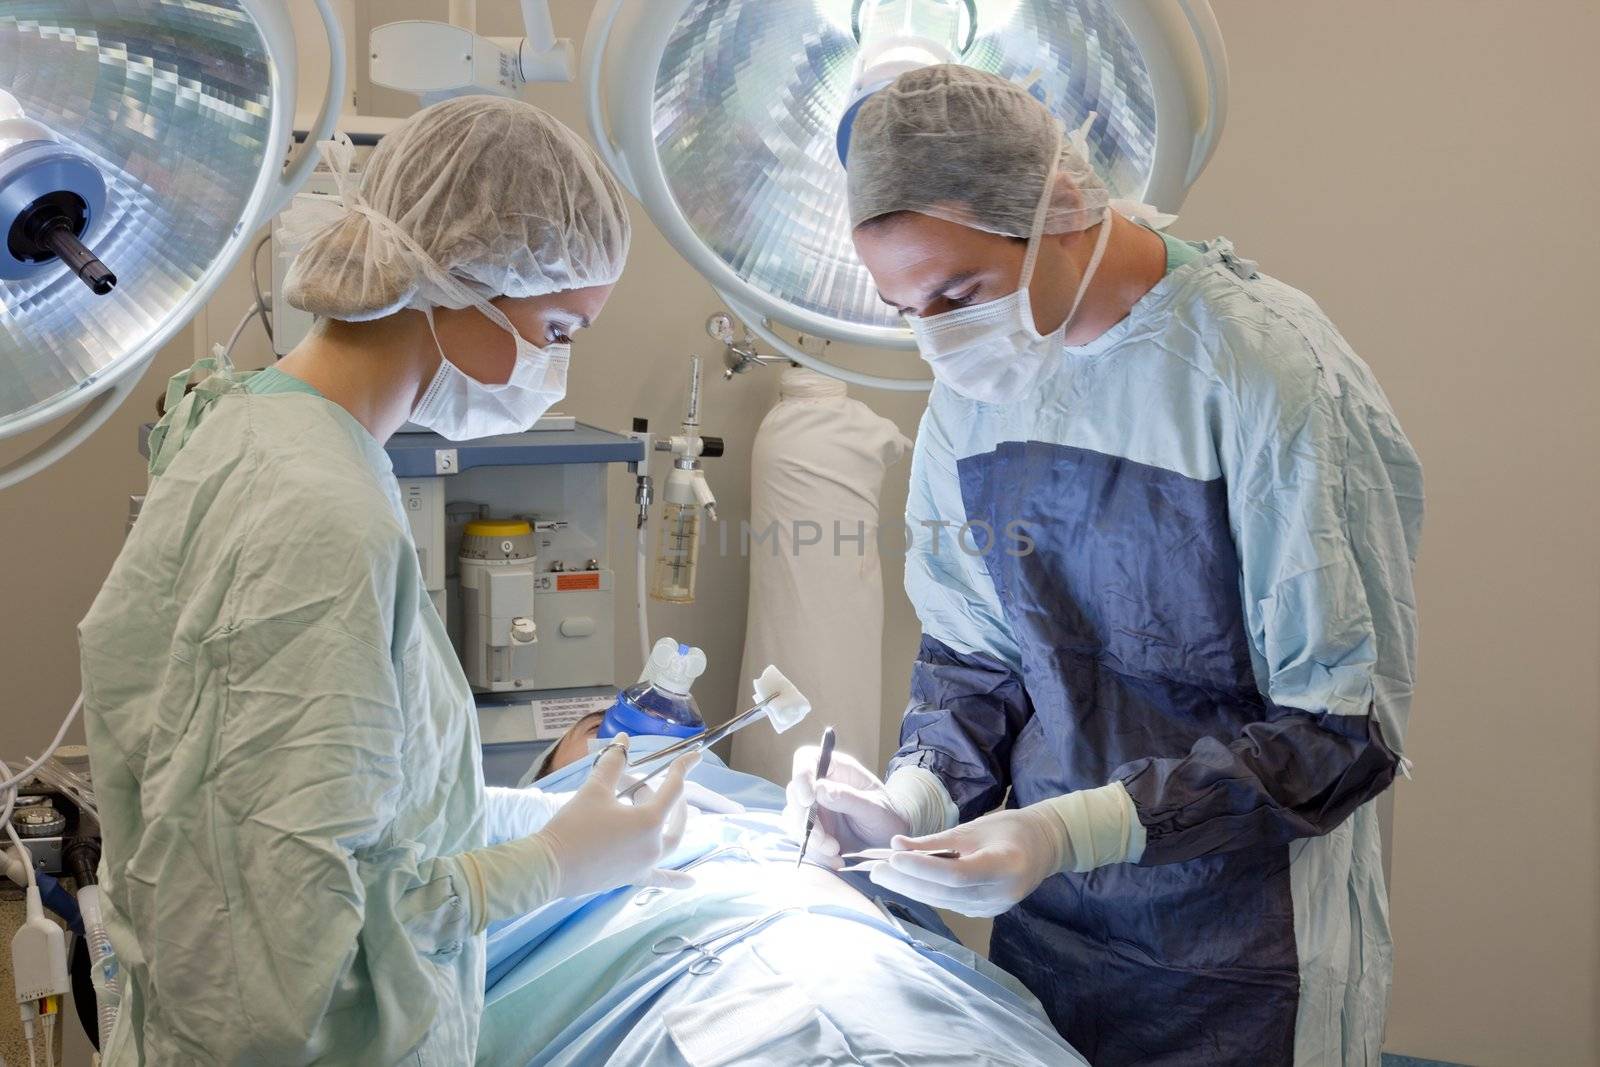 Medical doctor performing an operation on patient in operating room